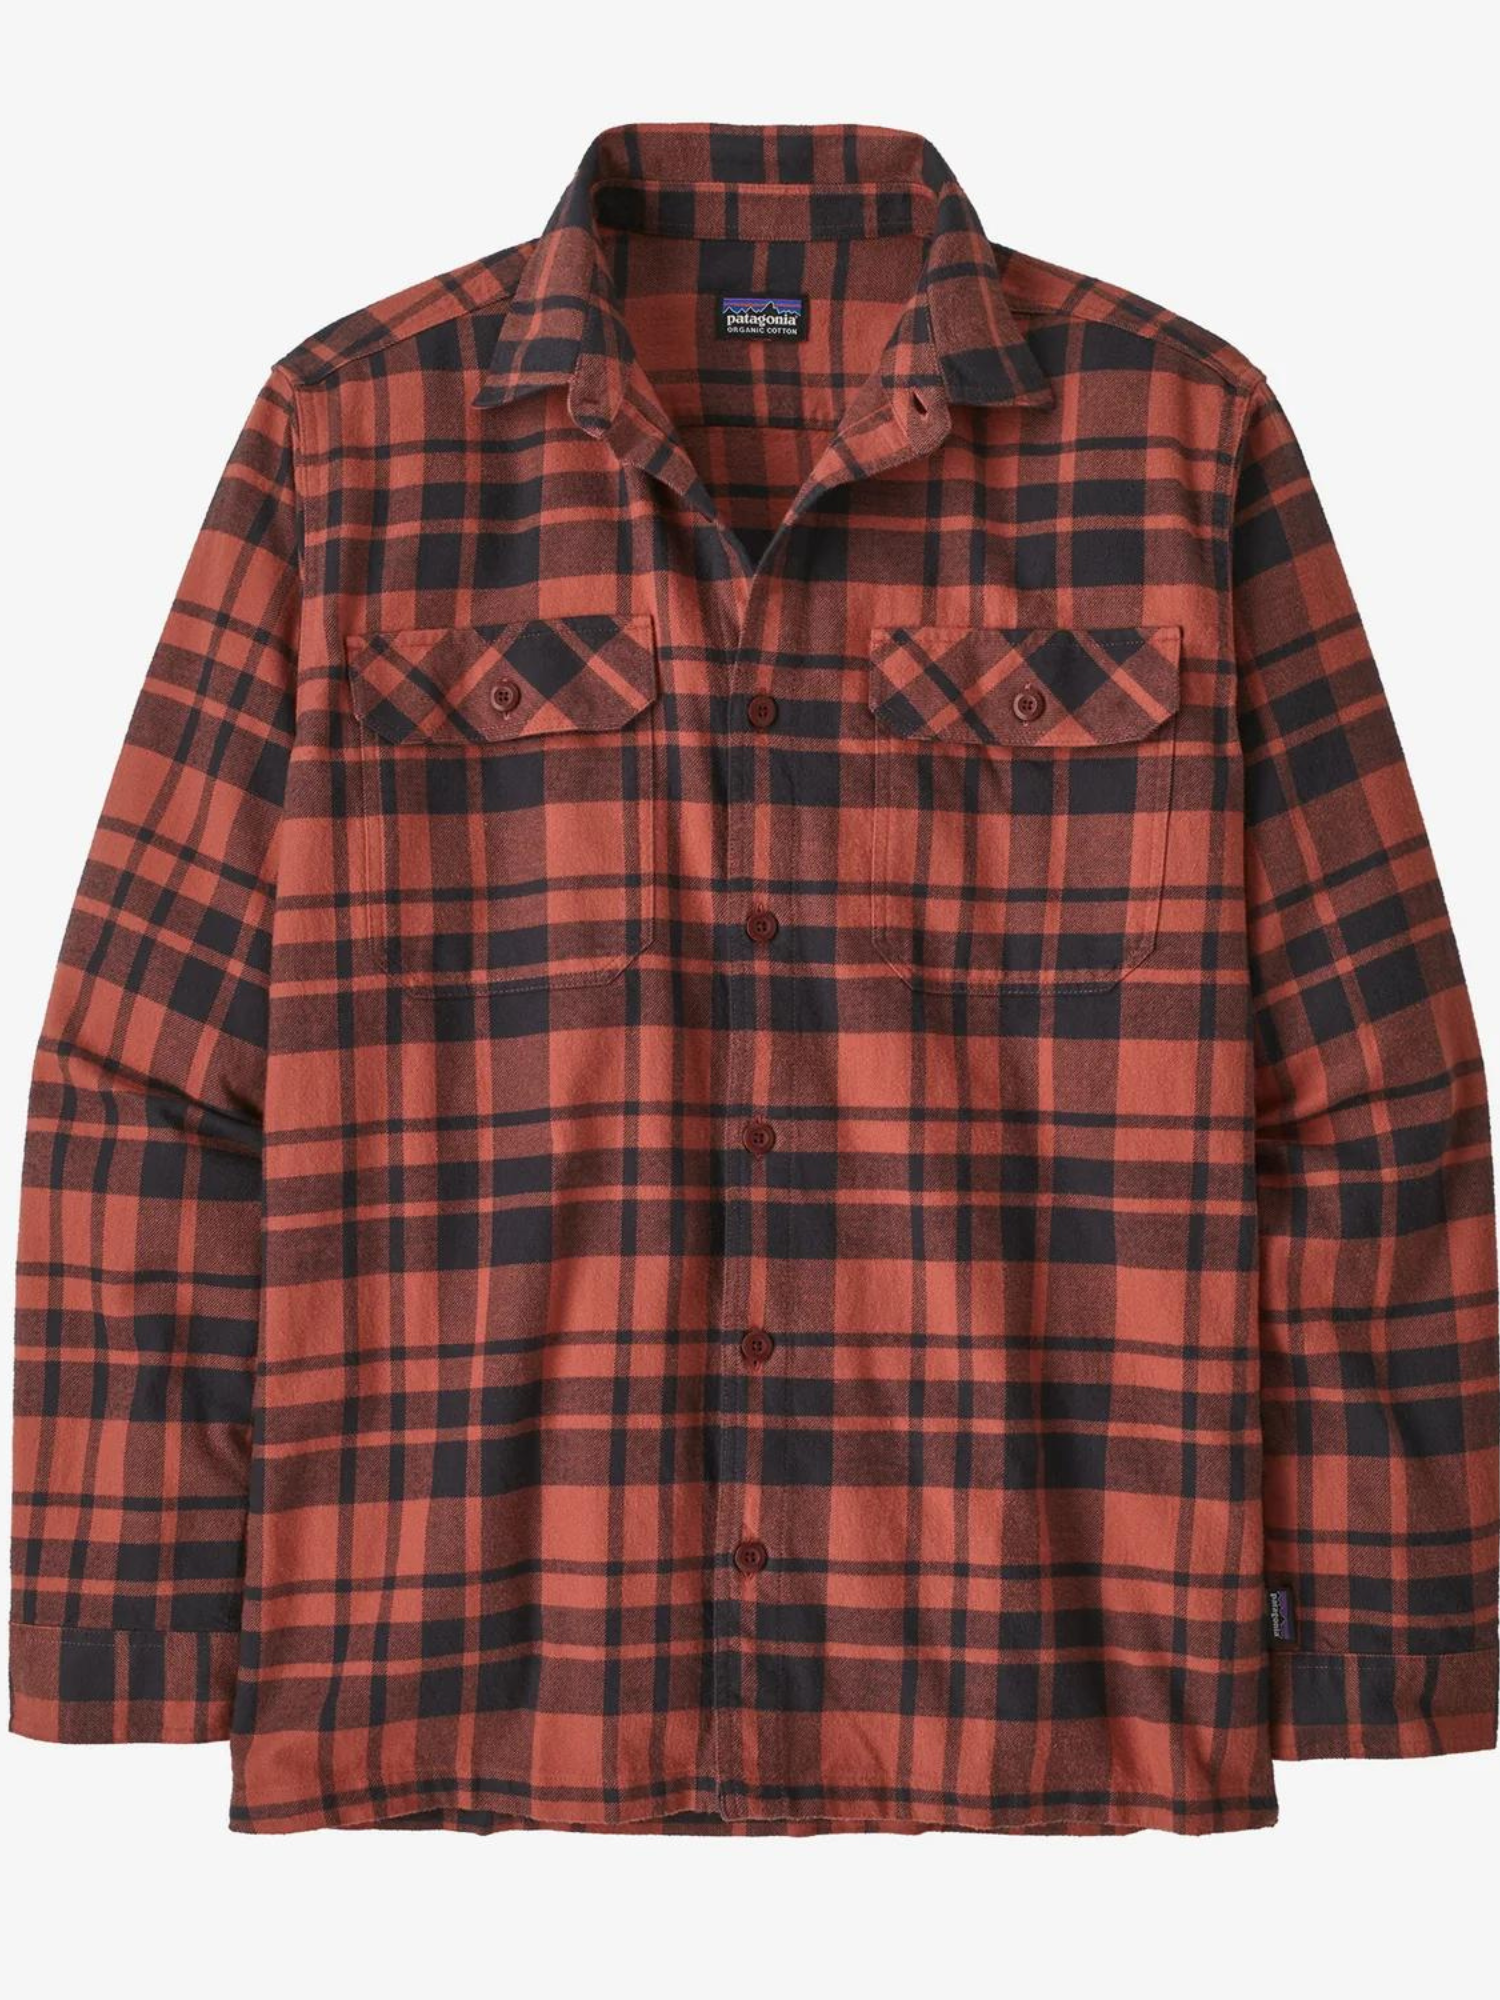 Patagonia Men's Long-Sleeved Organic Cotton Midweight Fjord Flannel Shirt - Ice Caps - Burl Red